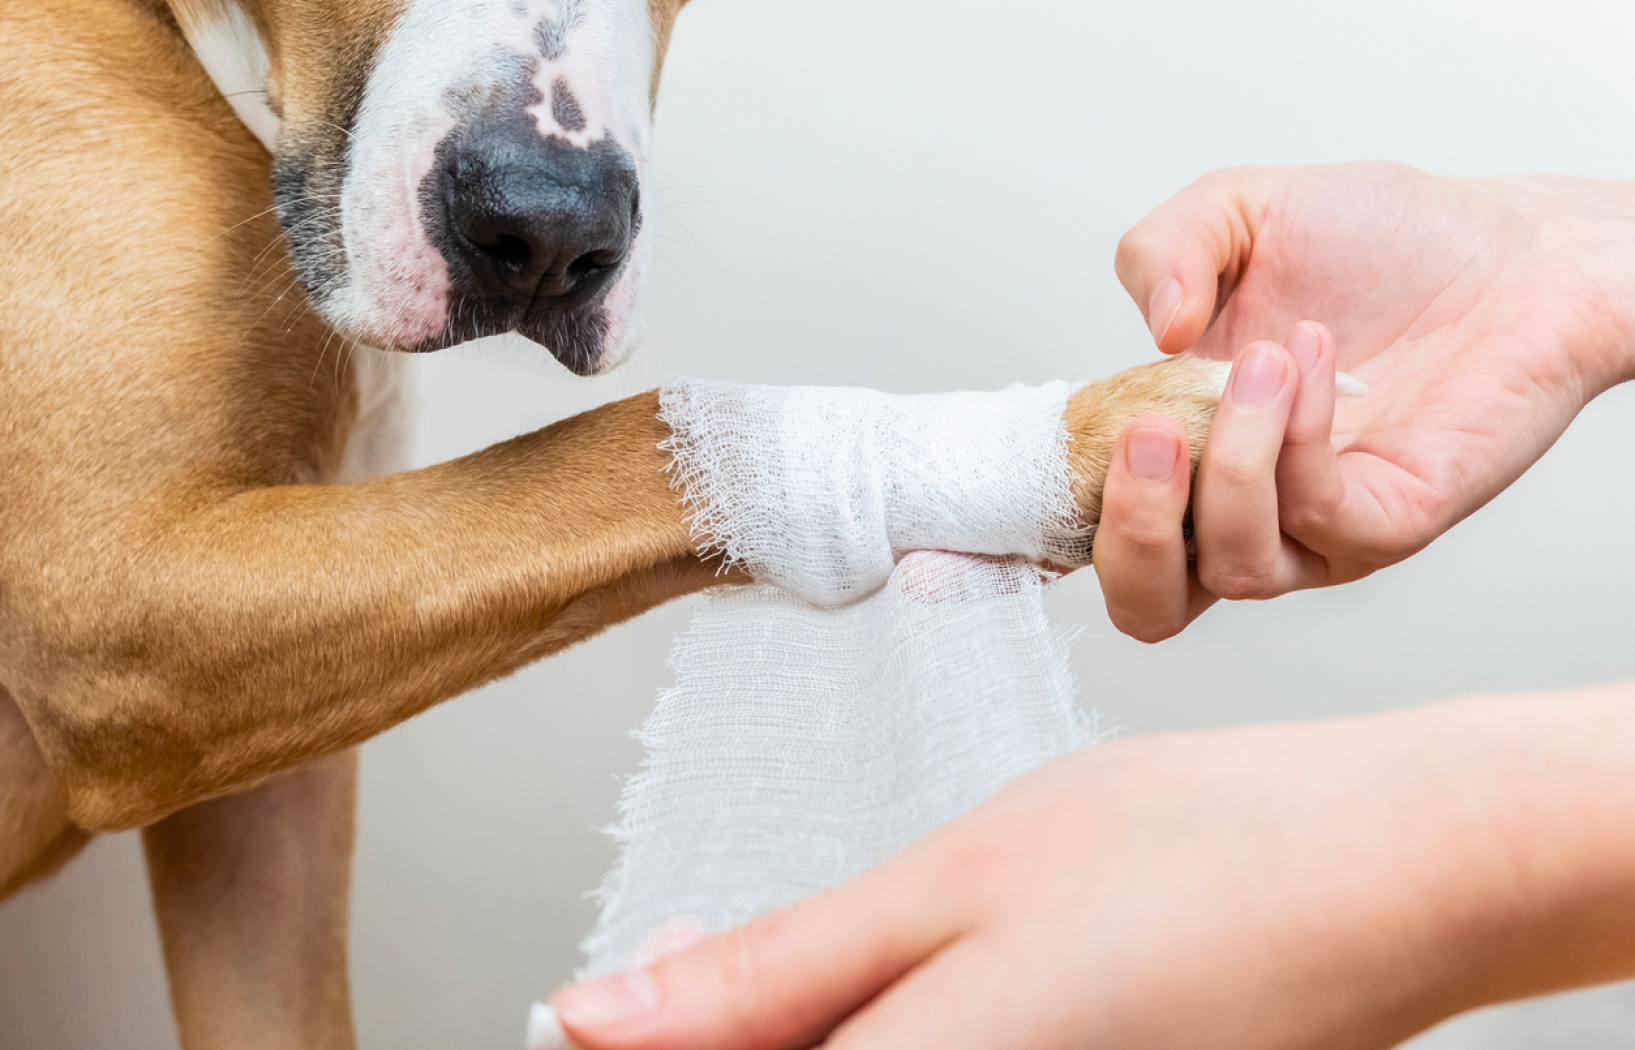 Learn to spot signs of illness and injury in dogs and the steps you need to take before vet care is available.